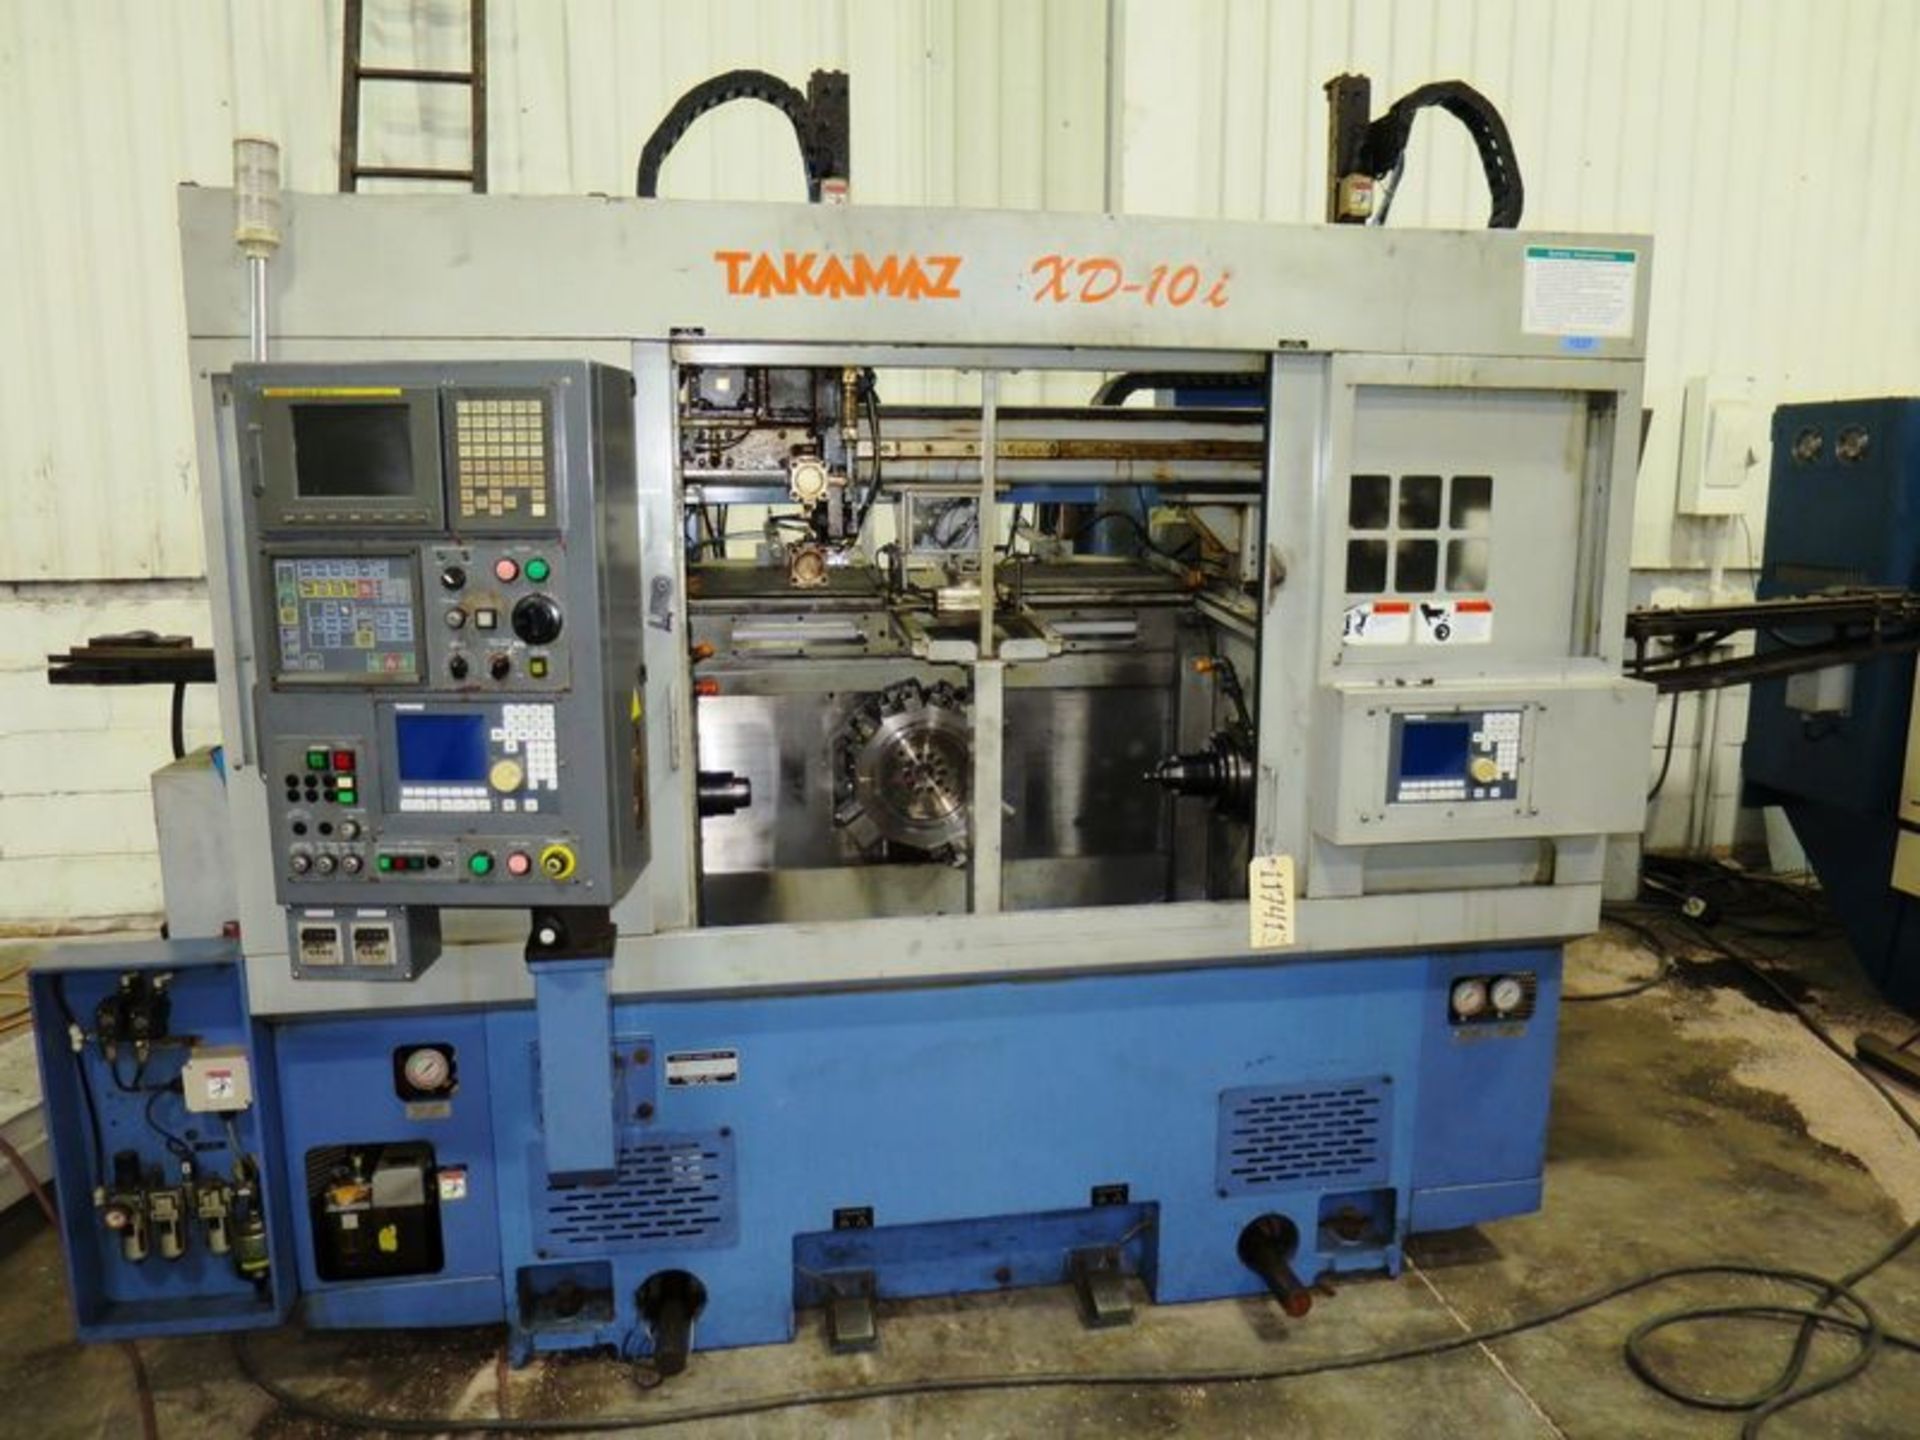 Takamaz XD-101 CNC Twin Spindle Turning Center with Gantry Loading System, S/N 300444, New 2006